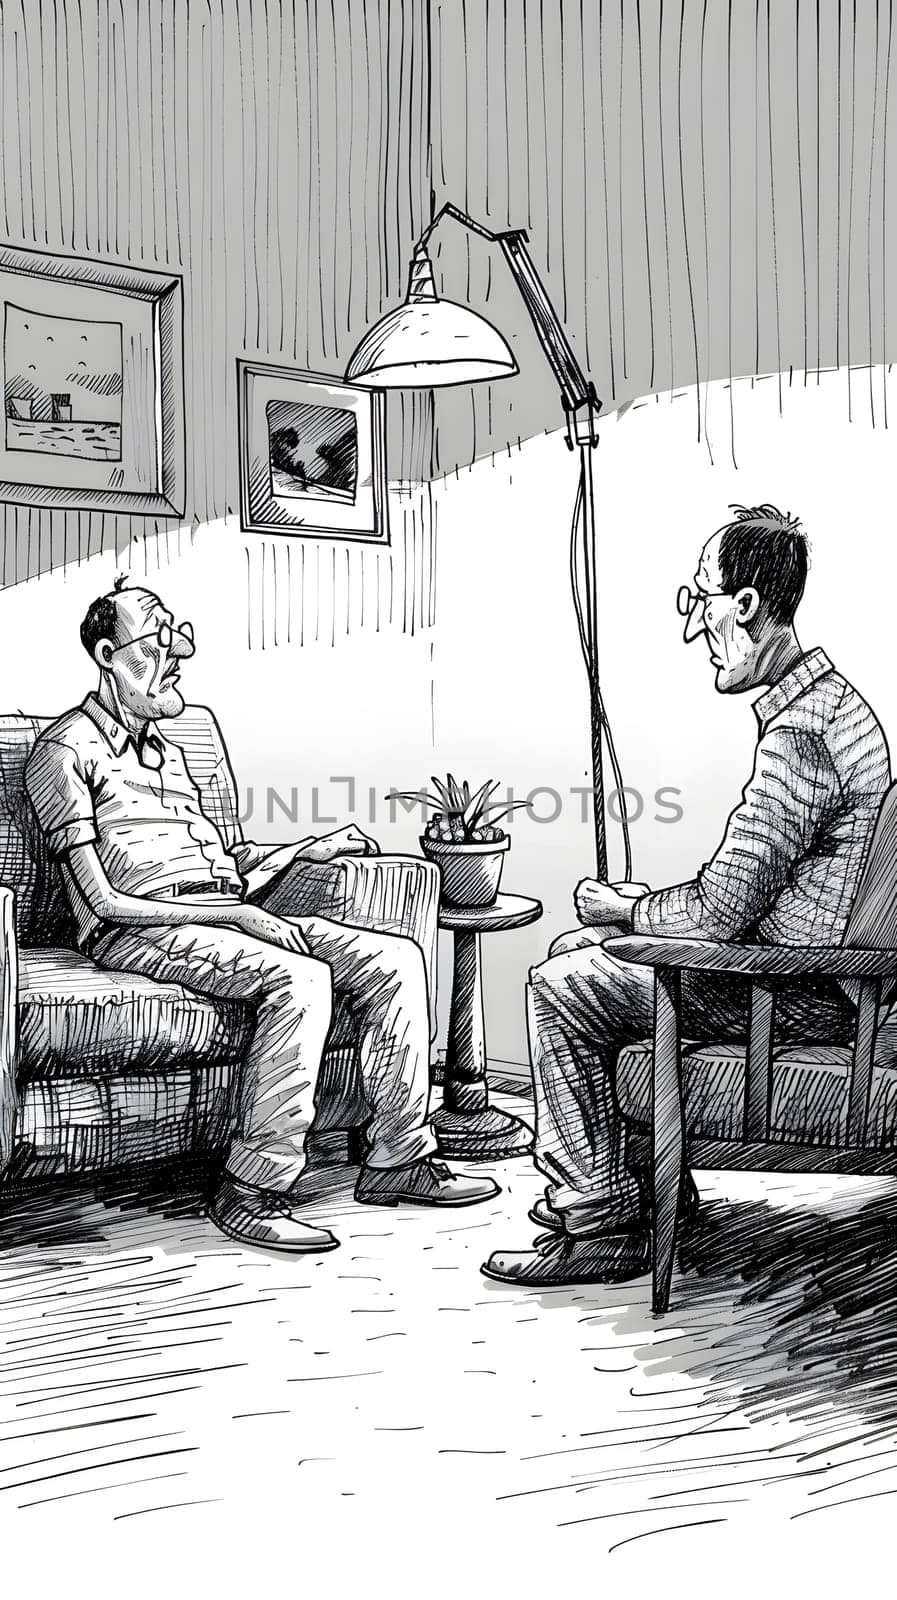 Two monochrome men sit in a room, discussing art and drawing by Nadtochiy